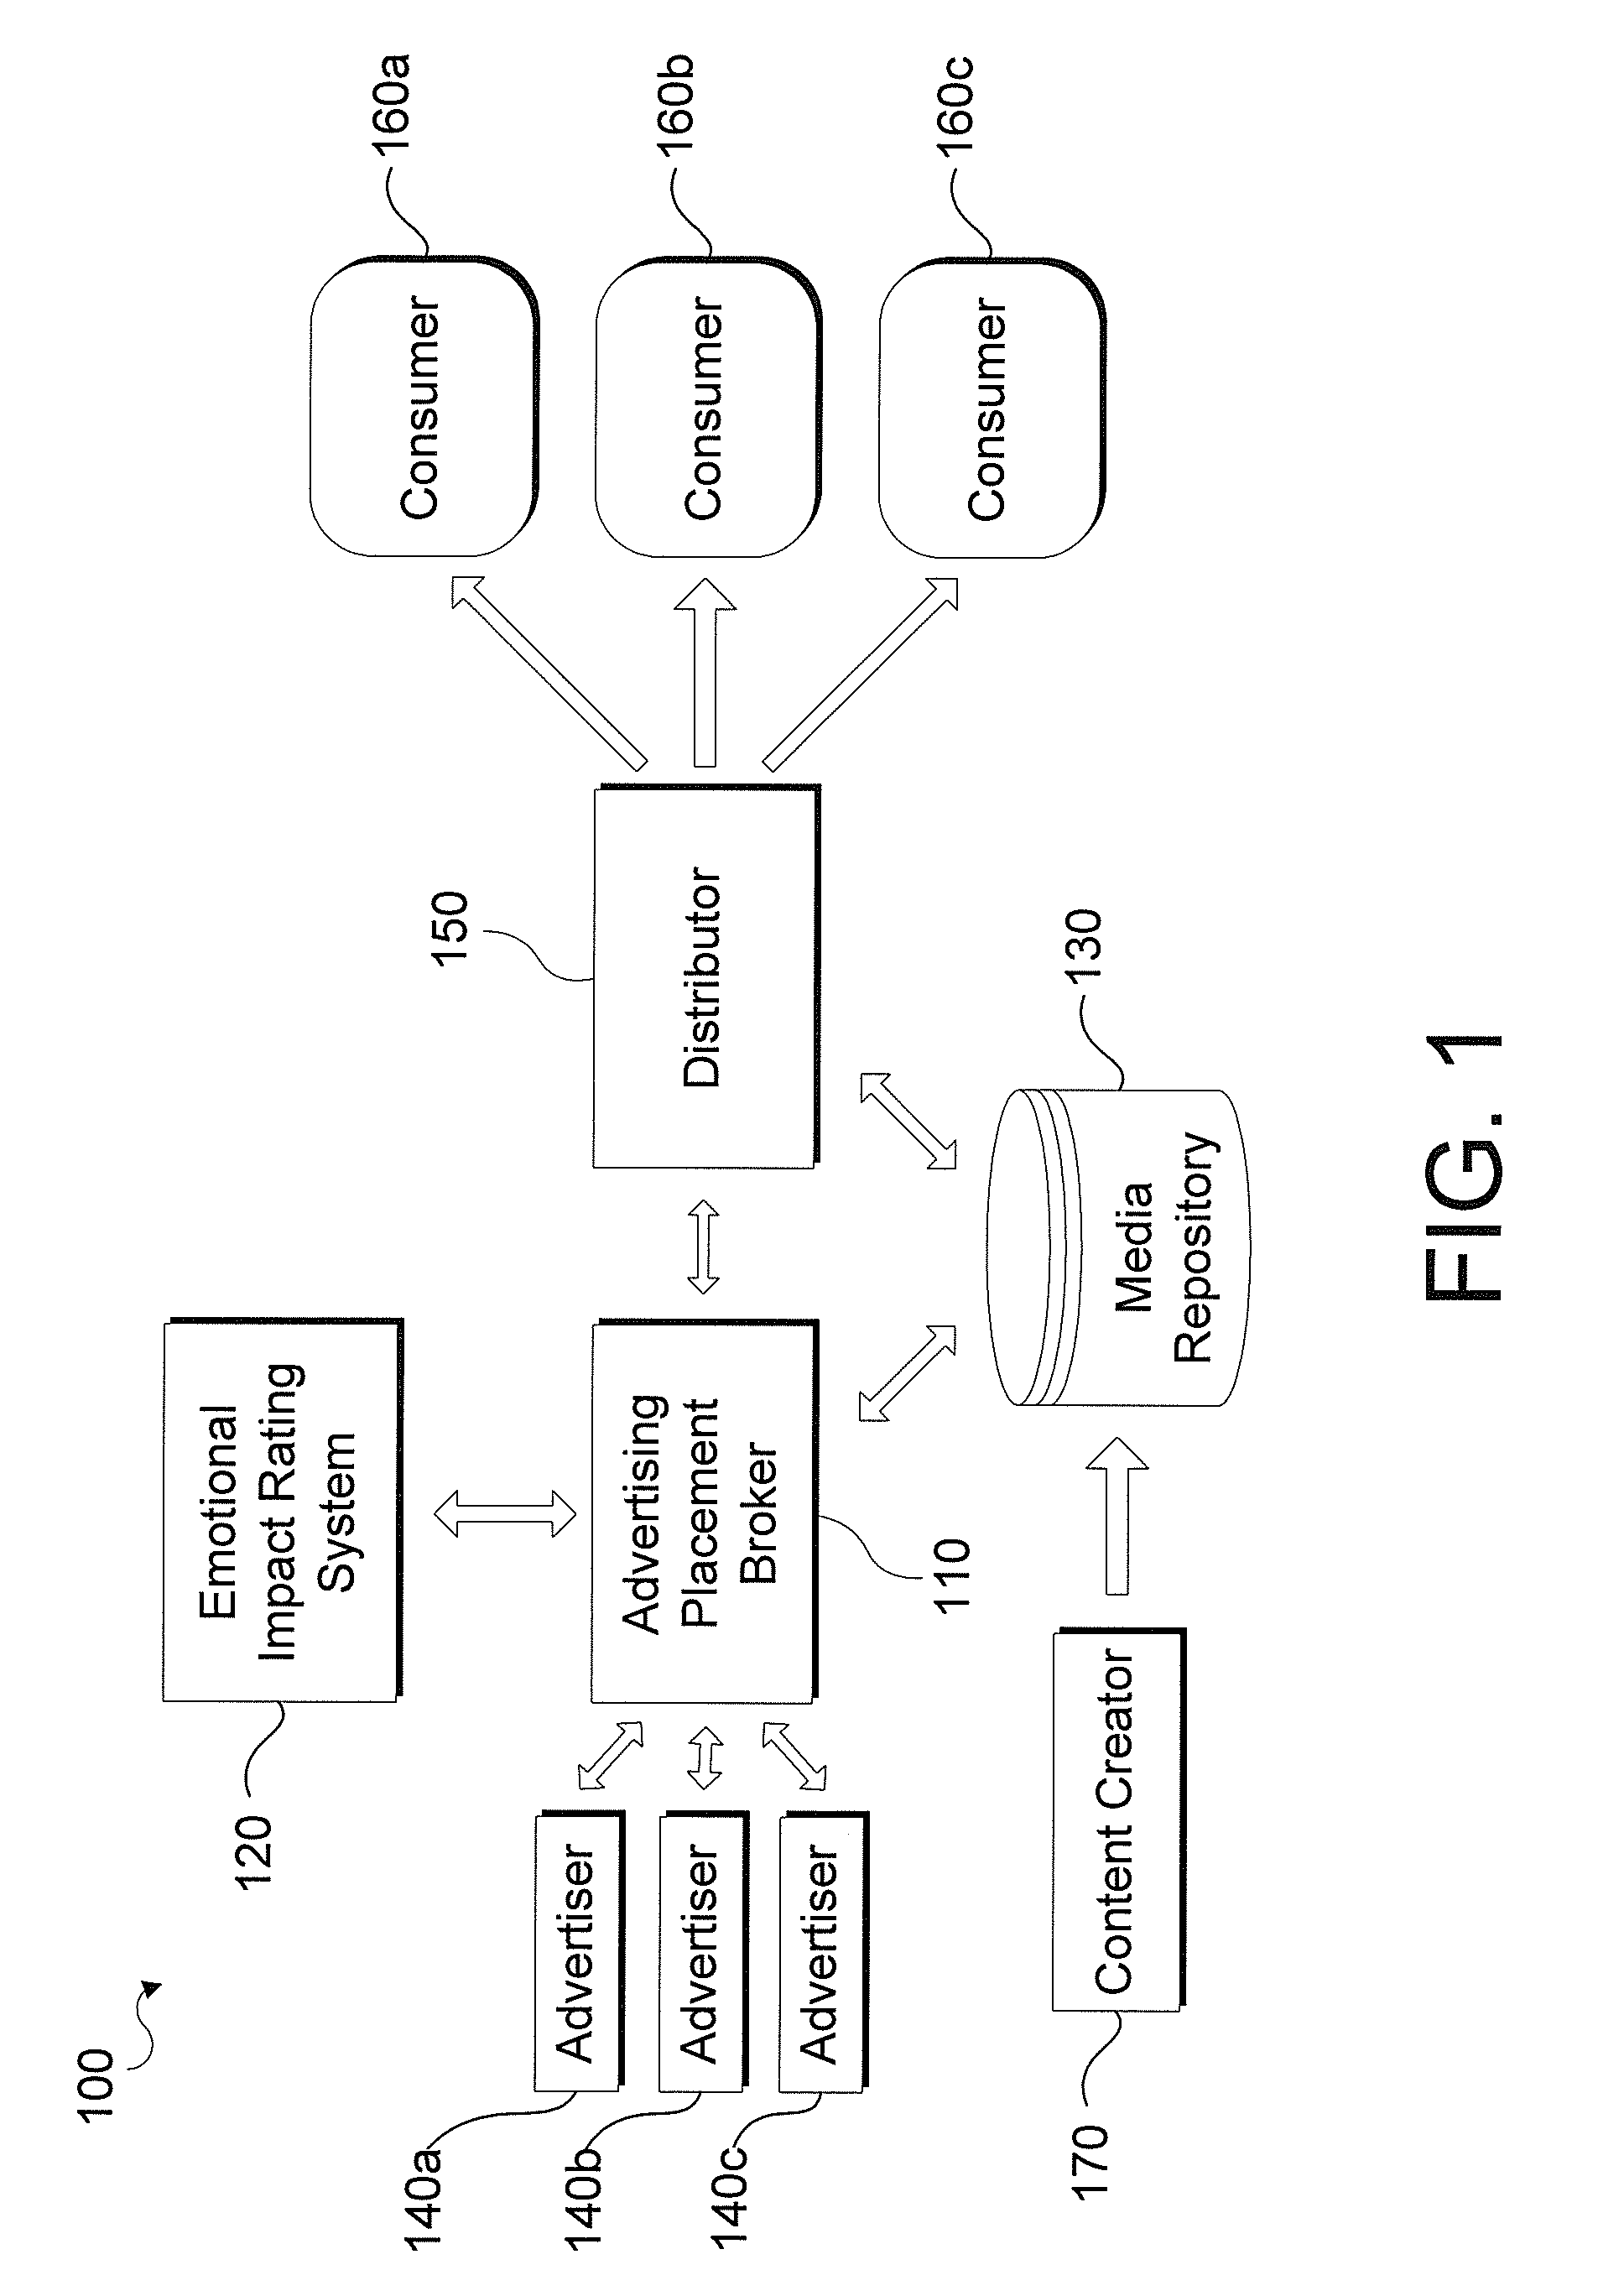 Method and system for data mining of social media to determine an emotional impact value to media content